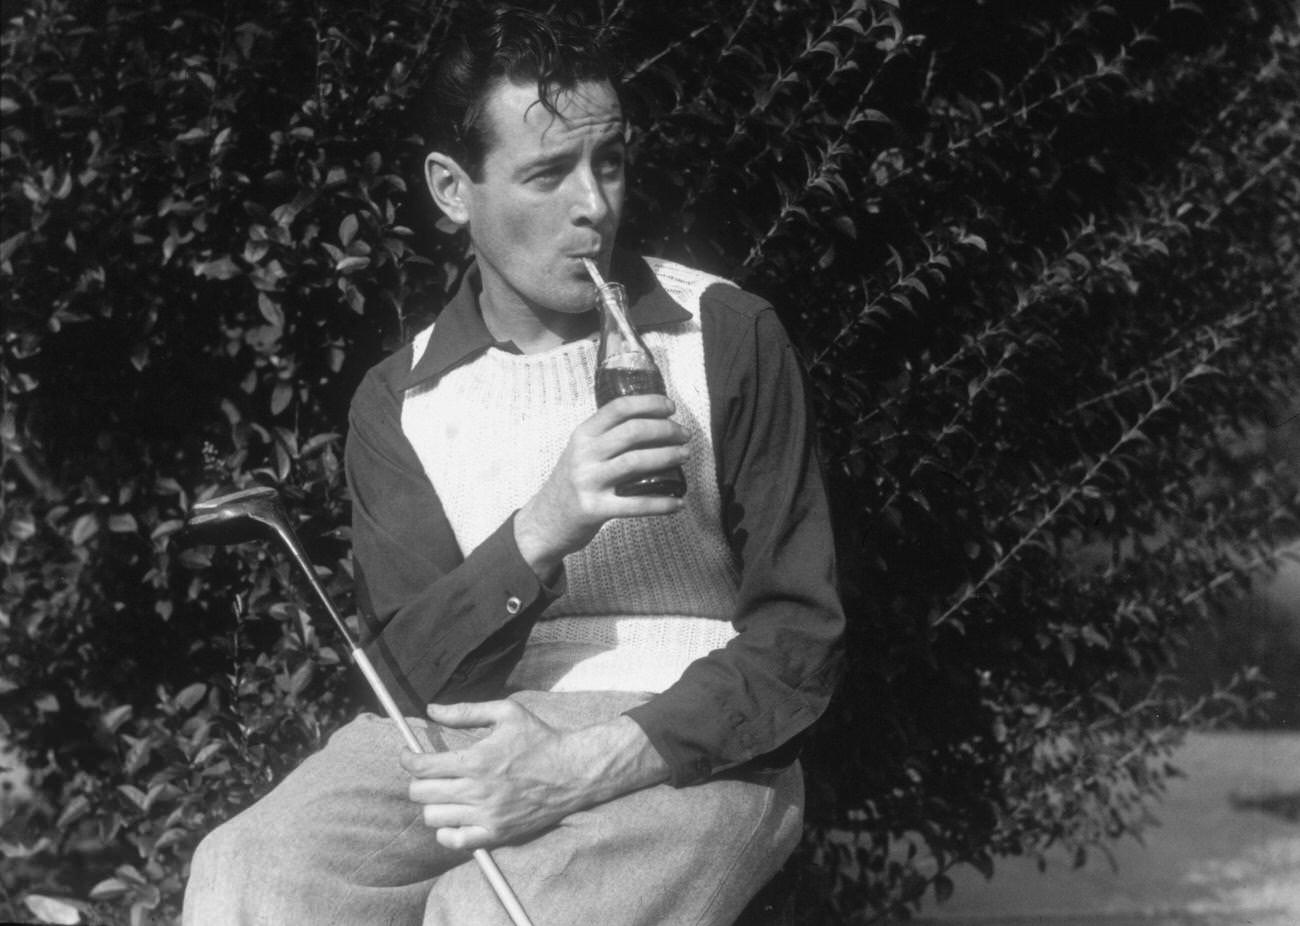 A young man sipping Coca-Cola with a golf club outdoors, circa 1935.